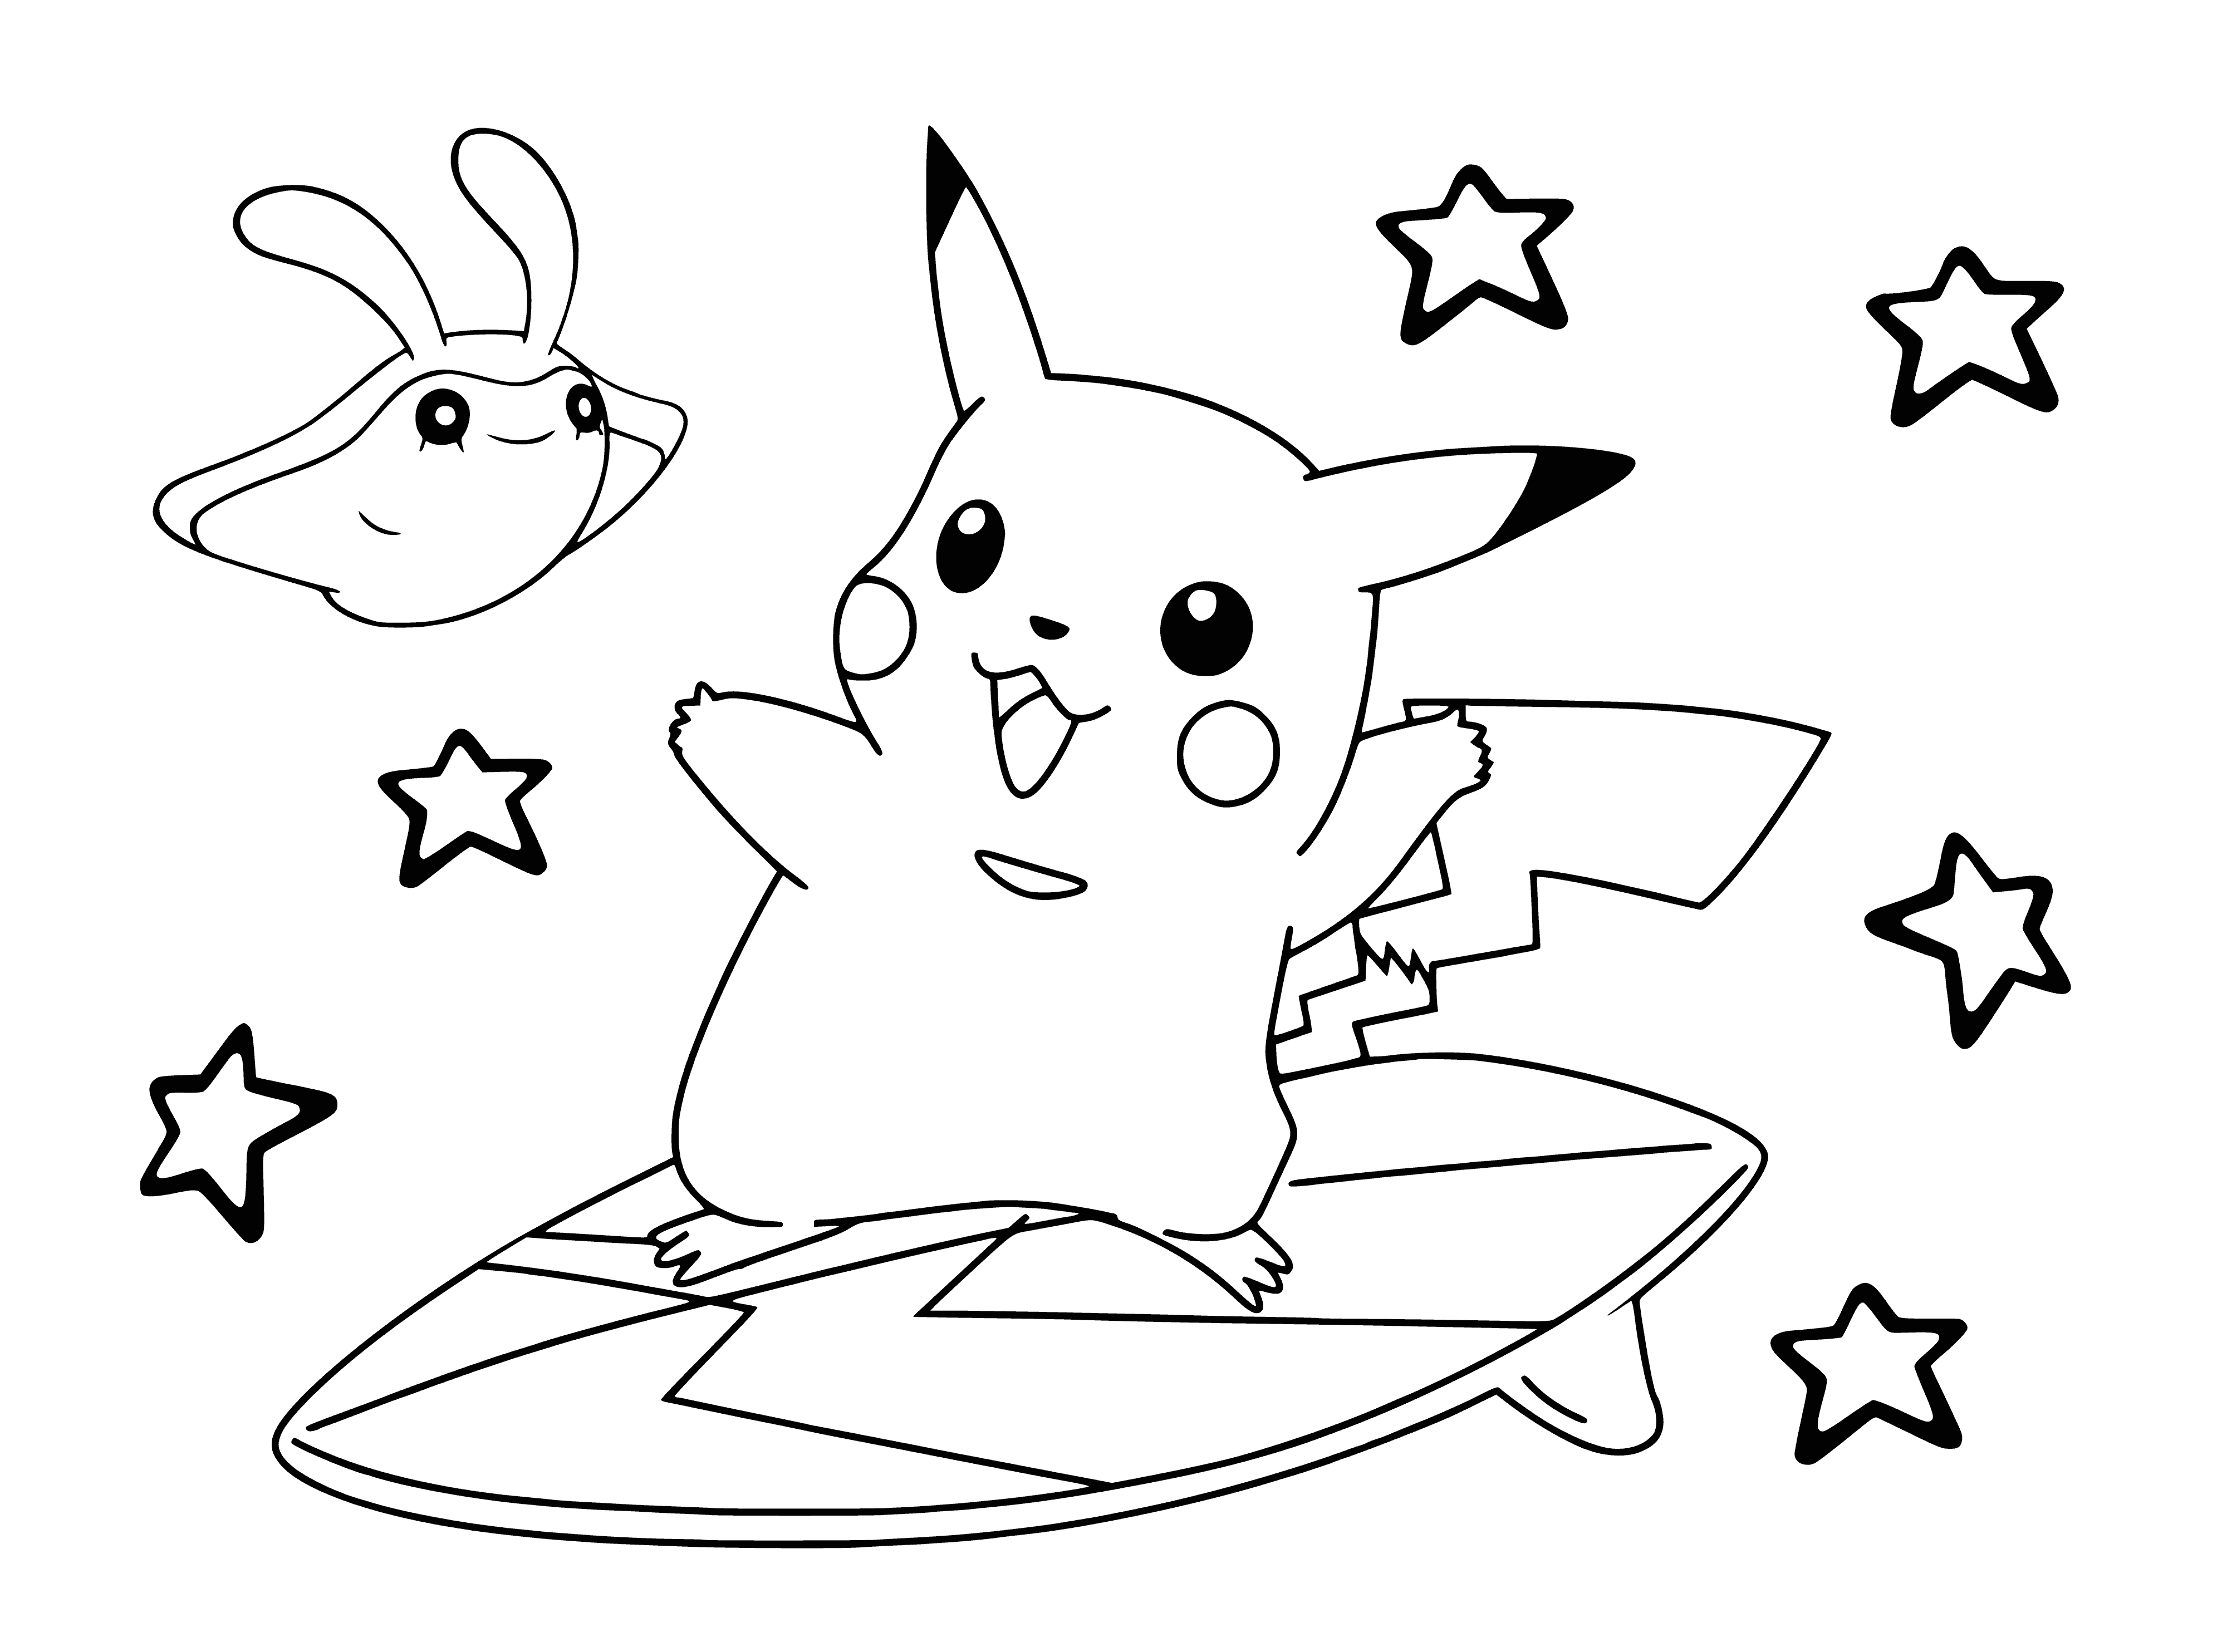 coloring page: This small, cute and chubby yellow Pokemon has a lightning bolt tail, pointy ears and black stripes. Its cheeks have red circles.